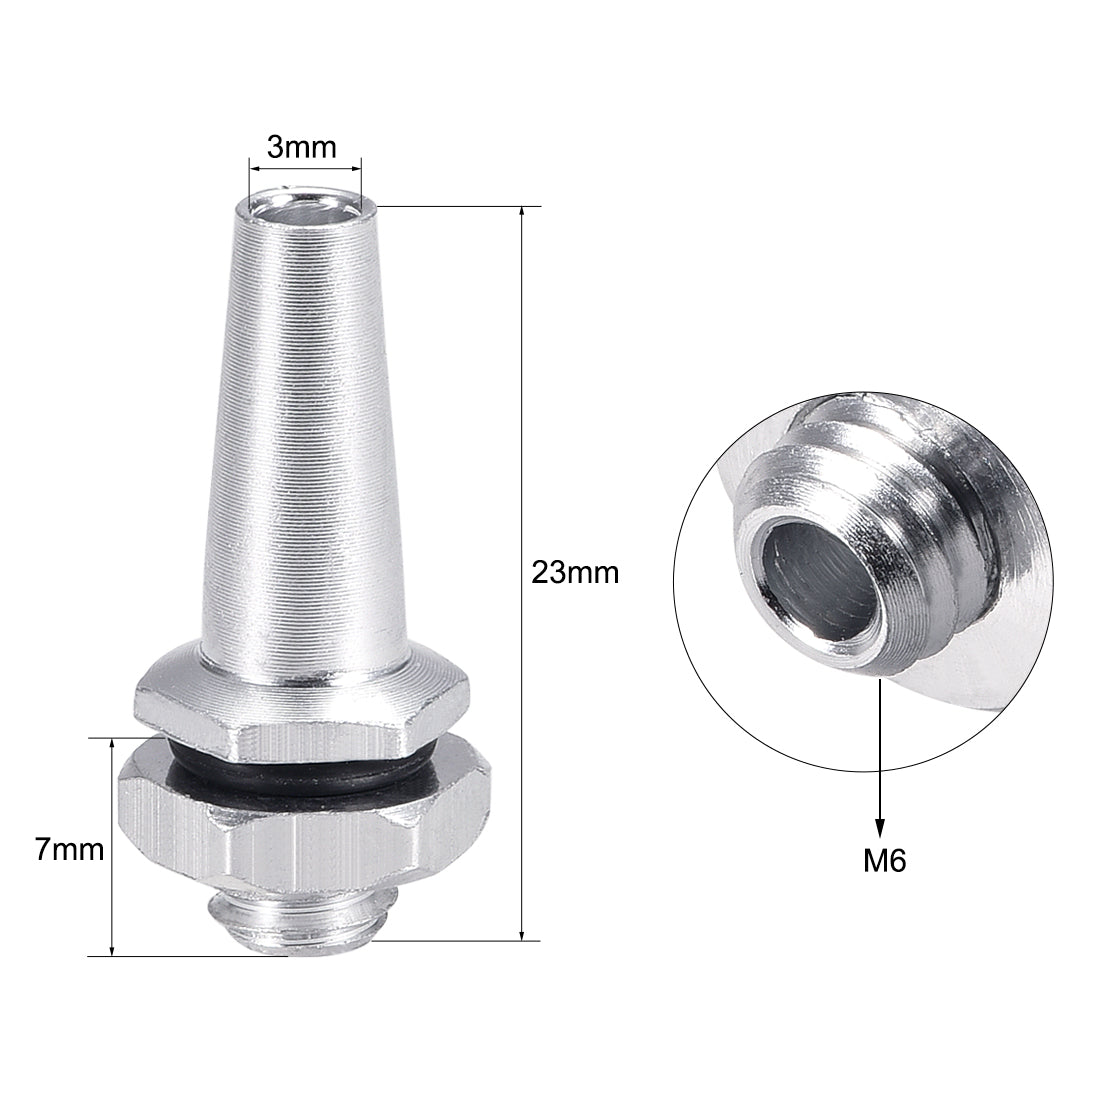 uxcell Uxcell RC Antenna Mount, M6 Thread, Aluminum Alloy, for RC Boat Silver 4pcs